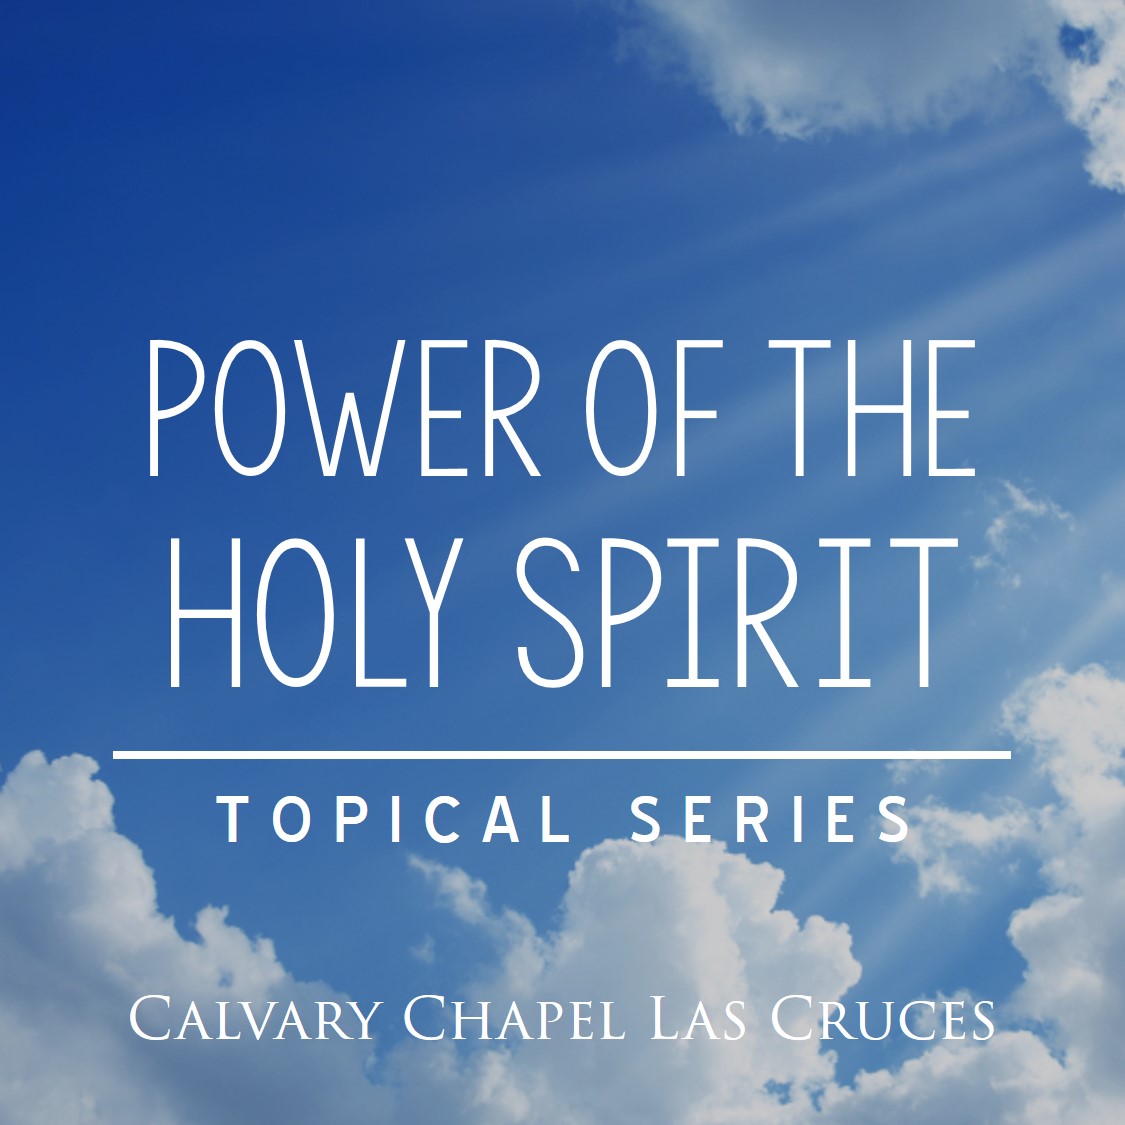 The Power of the Holy Spirit, Part 19